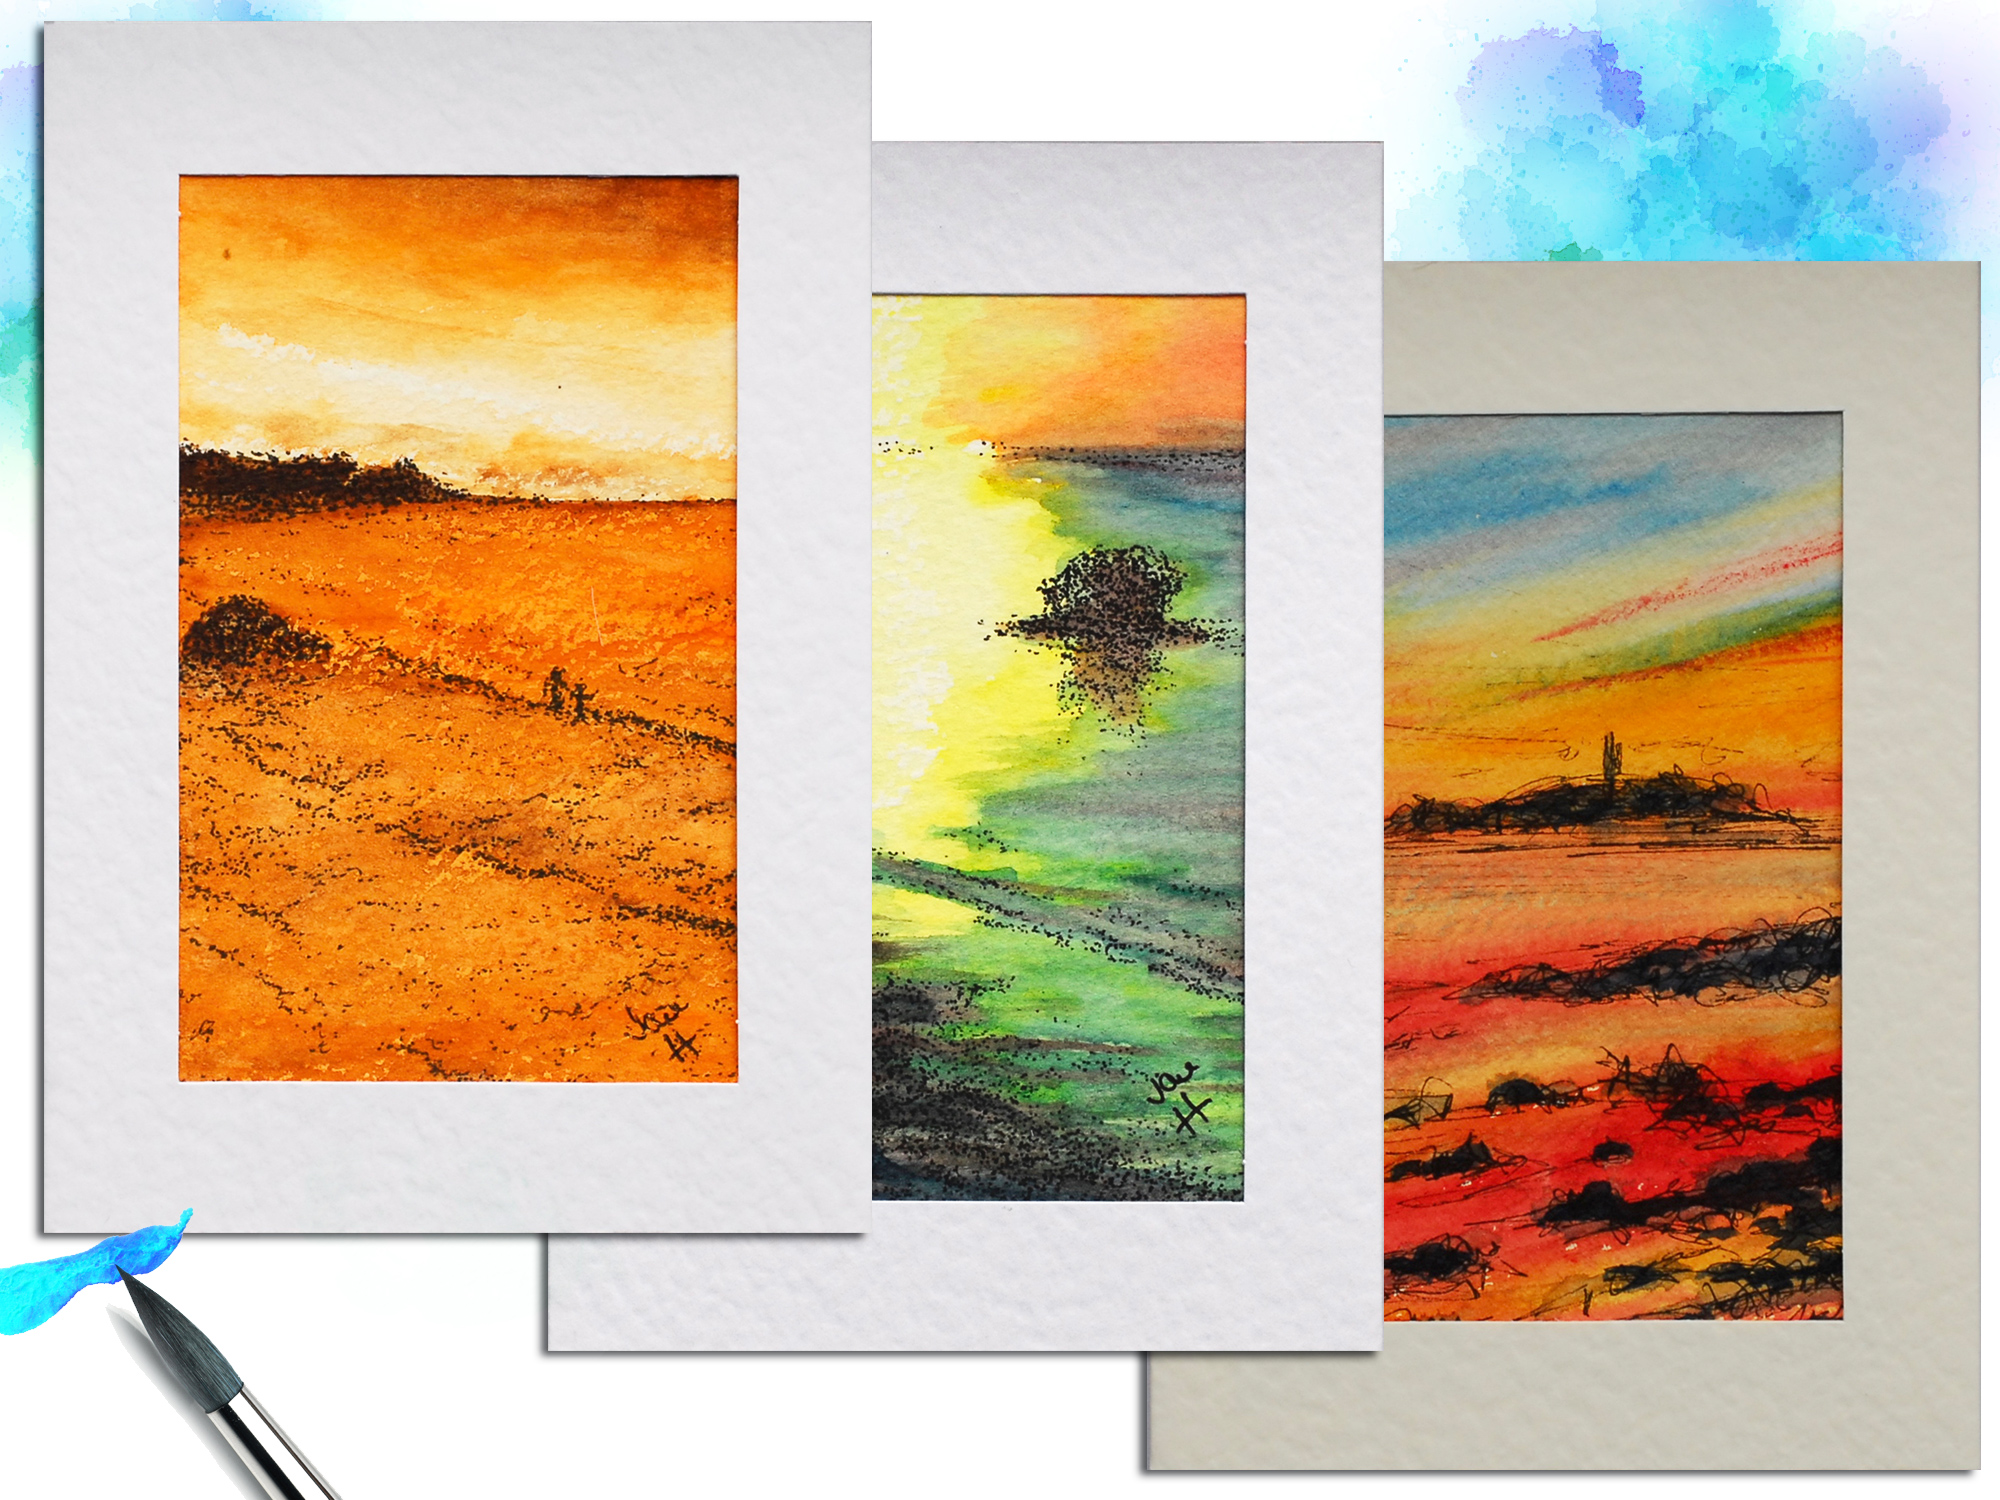 3 greeting cards of Cornish sunsets